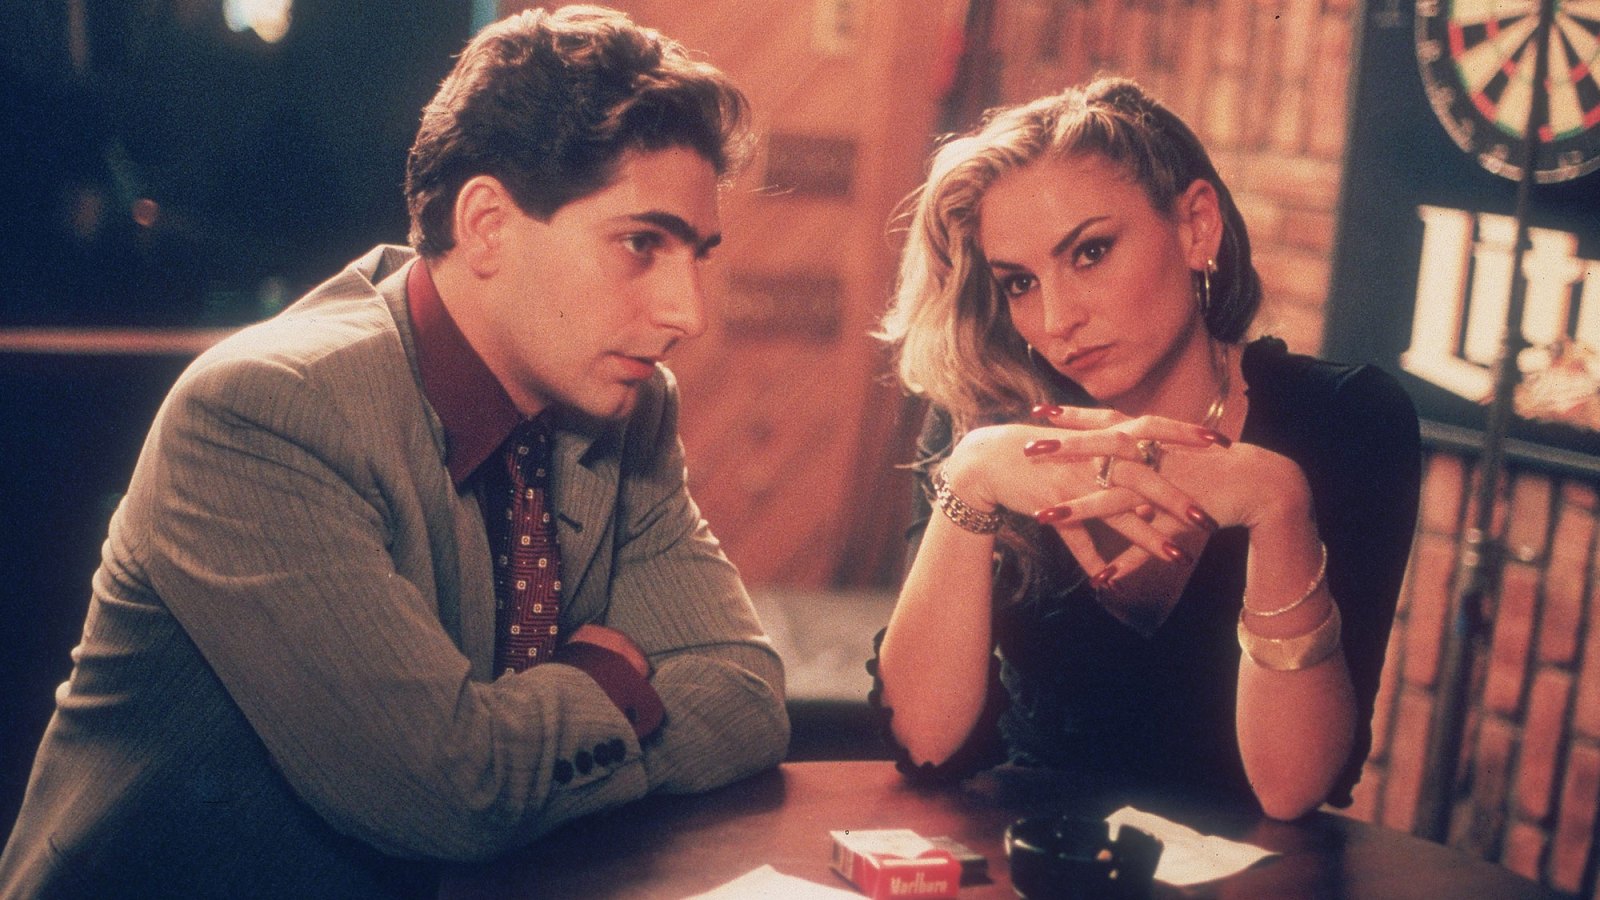 How To Perfectly Achieve the Mob Wife Look According to the Sopranos Costume Designer